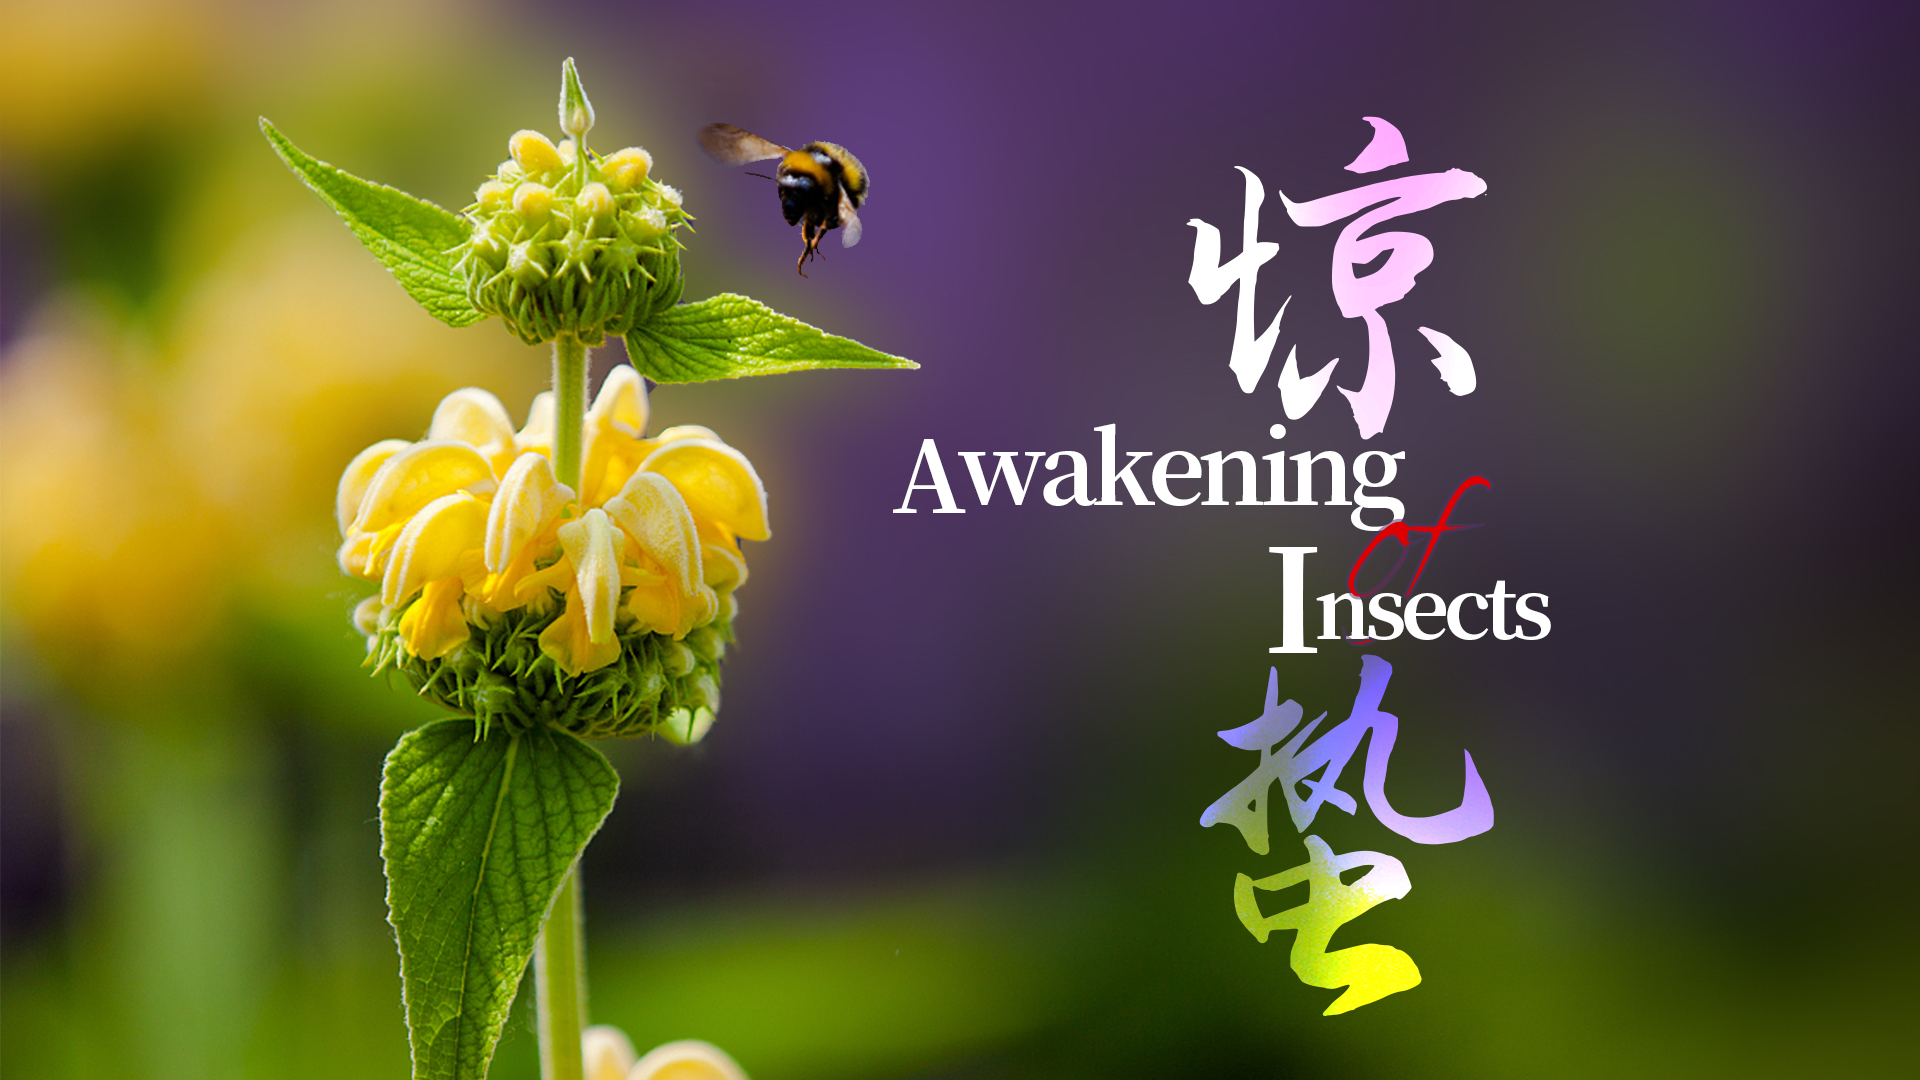 China's 24 solar terms: Jingzhe, Awakening of Insects